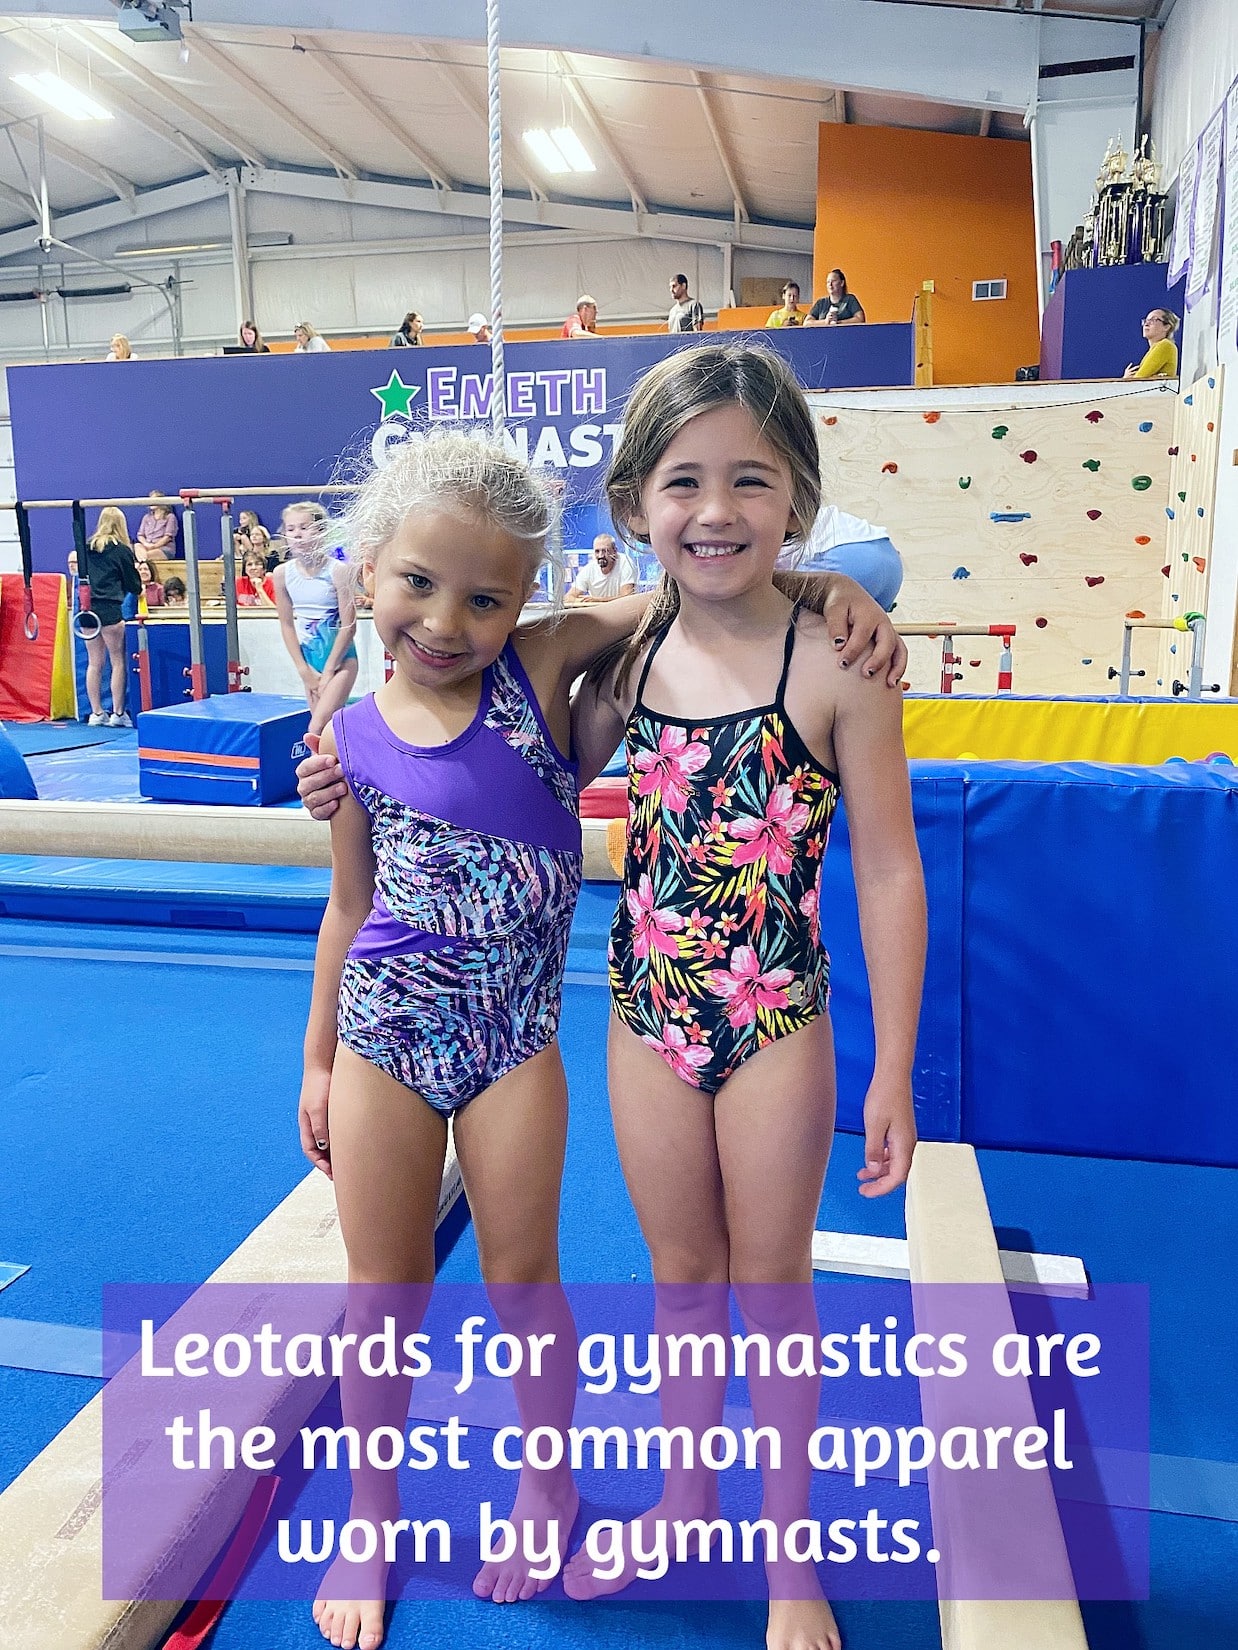 Leotards for gymnastics are the most common apparel worn by gymnasts.